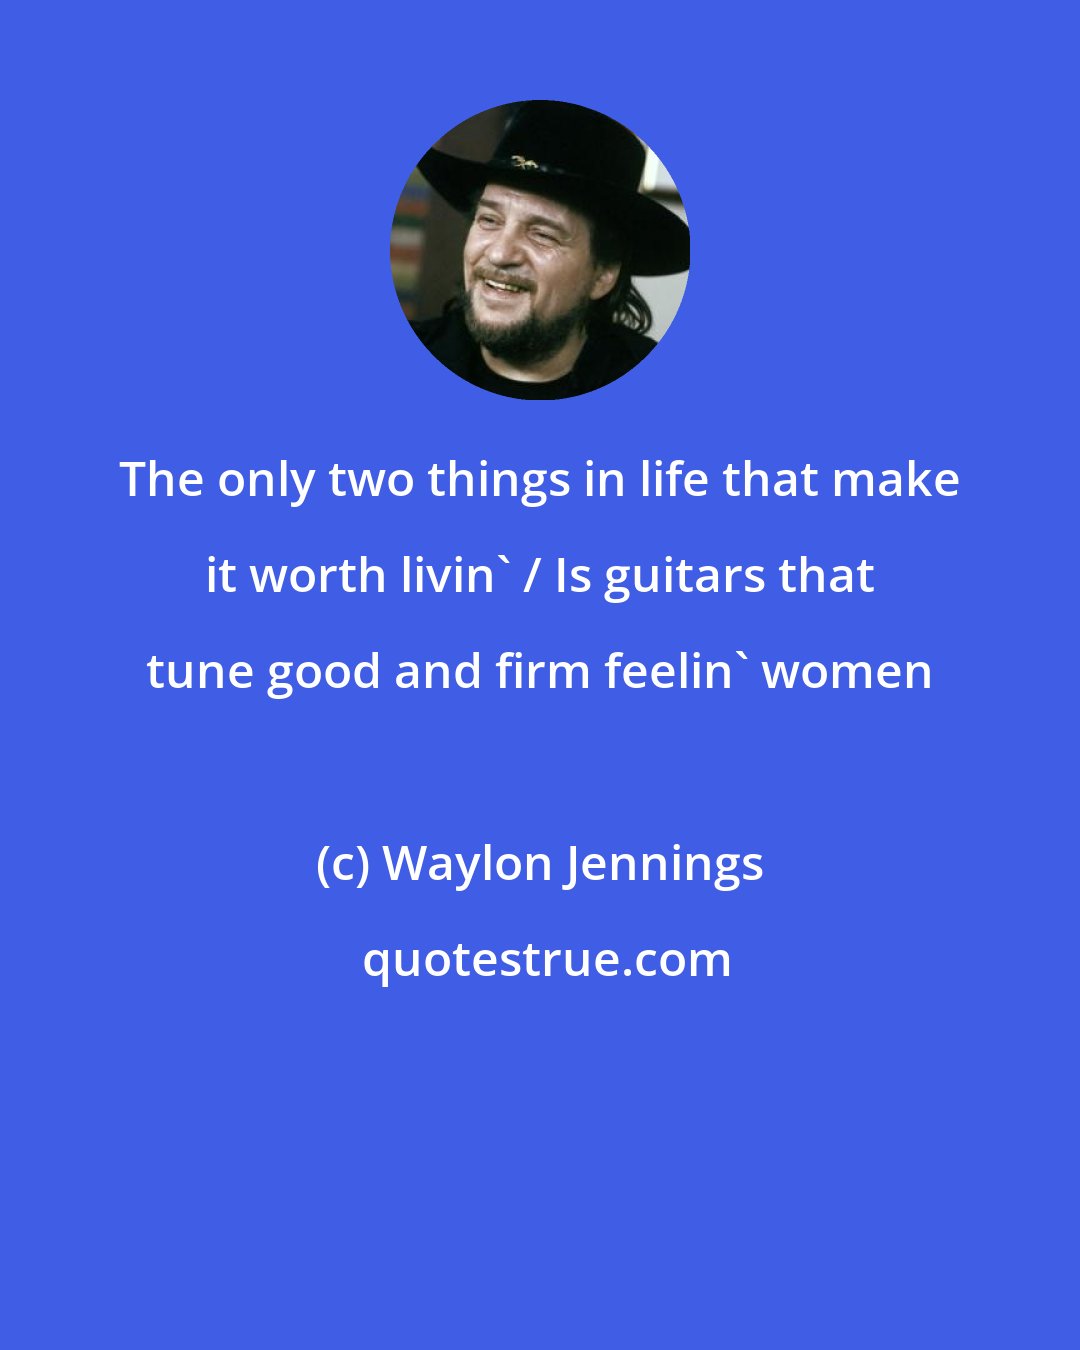 Waylon Jennings: The only two things in life that make it worth livin' / Is guitars that tune good and firm feelin' women